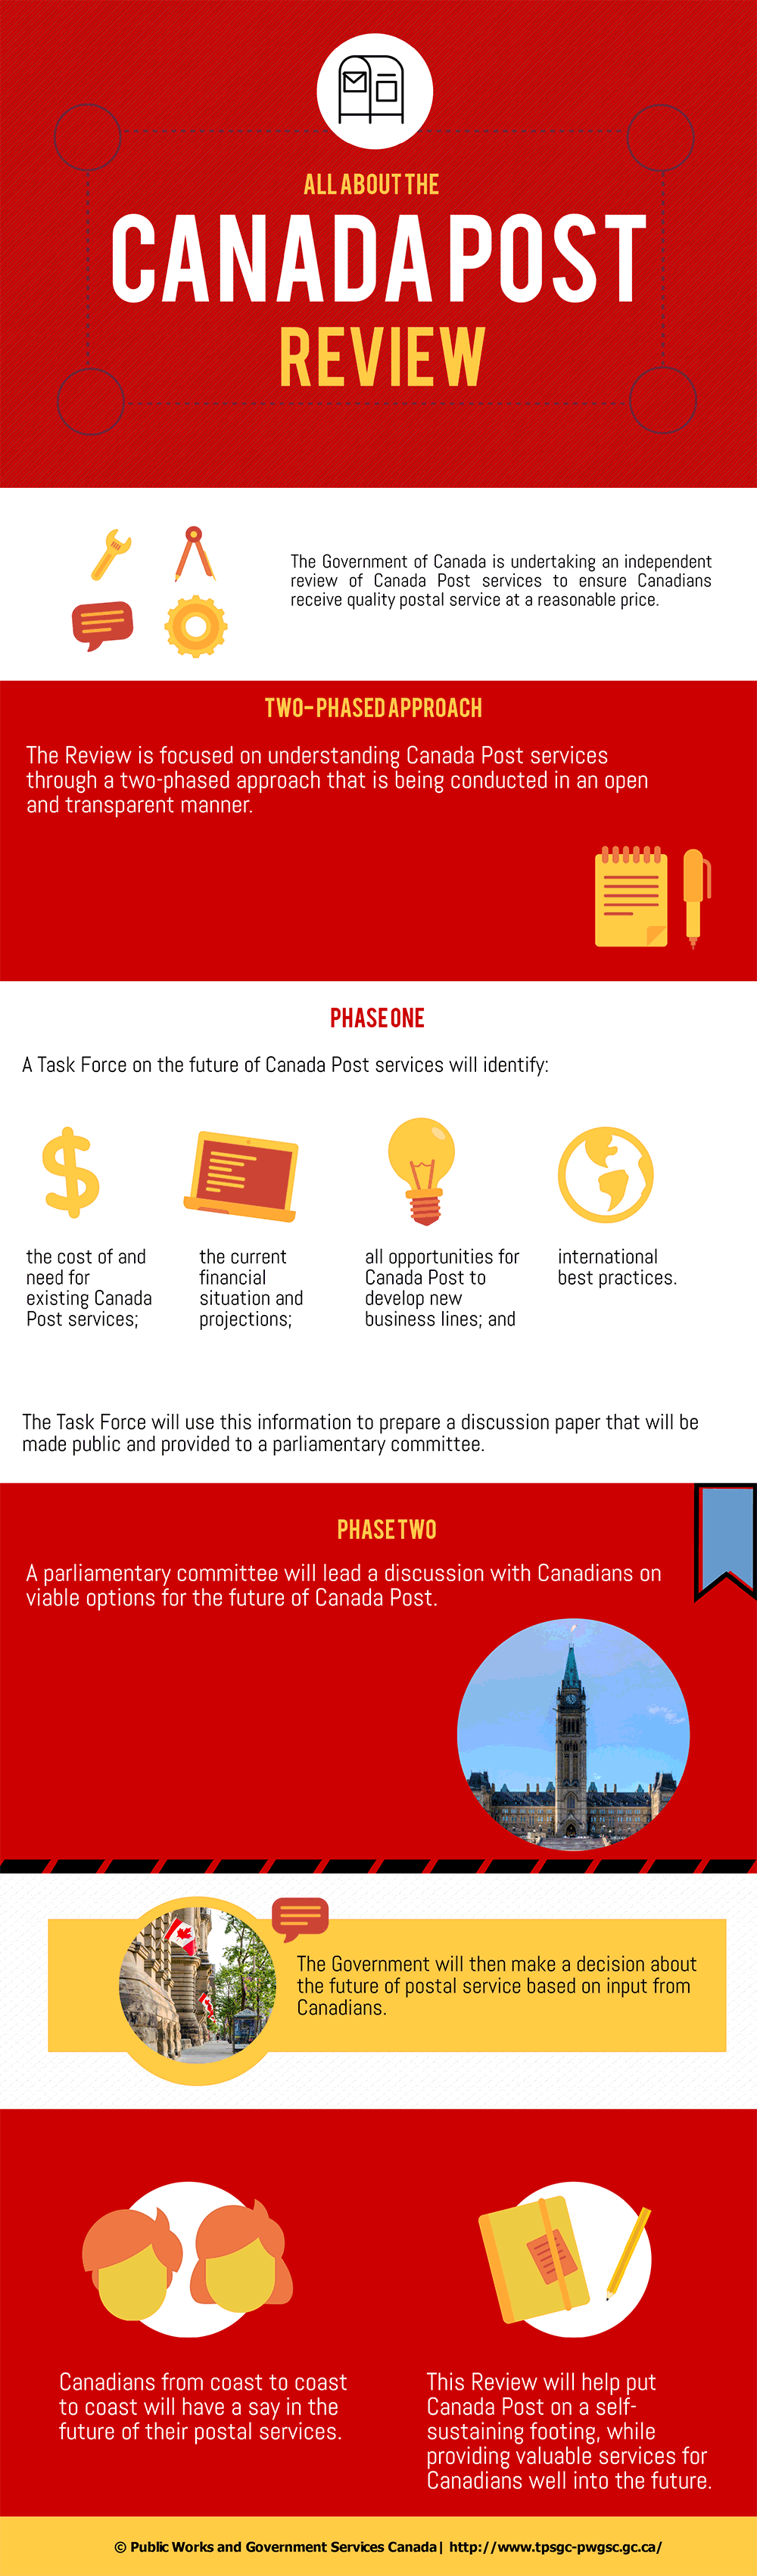 Infographic: All about the Canada post review